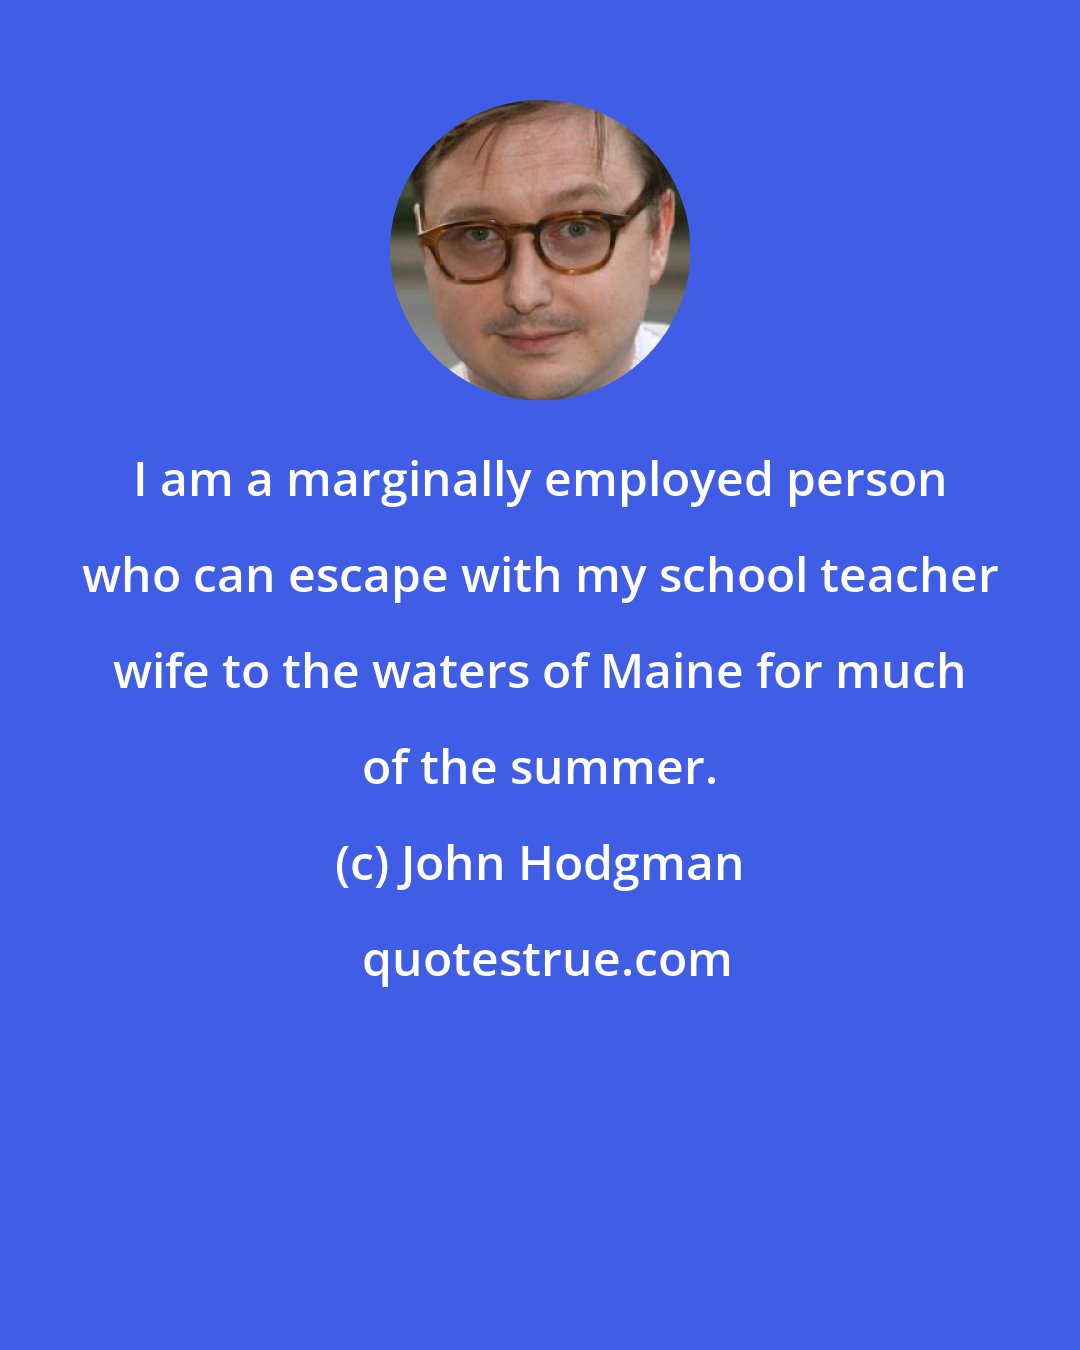 John Hodgman: I am a marginally employed person who can escape with my school teacher wife to the waters of Maine for much of the summer.